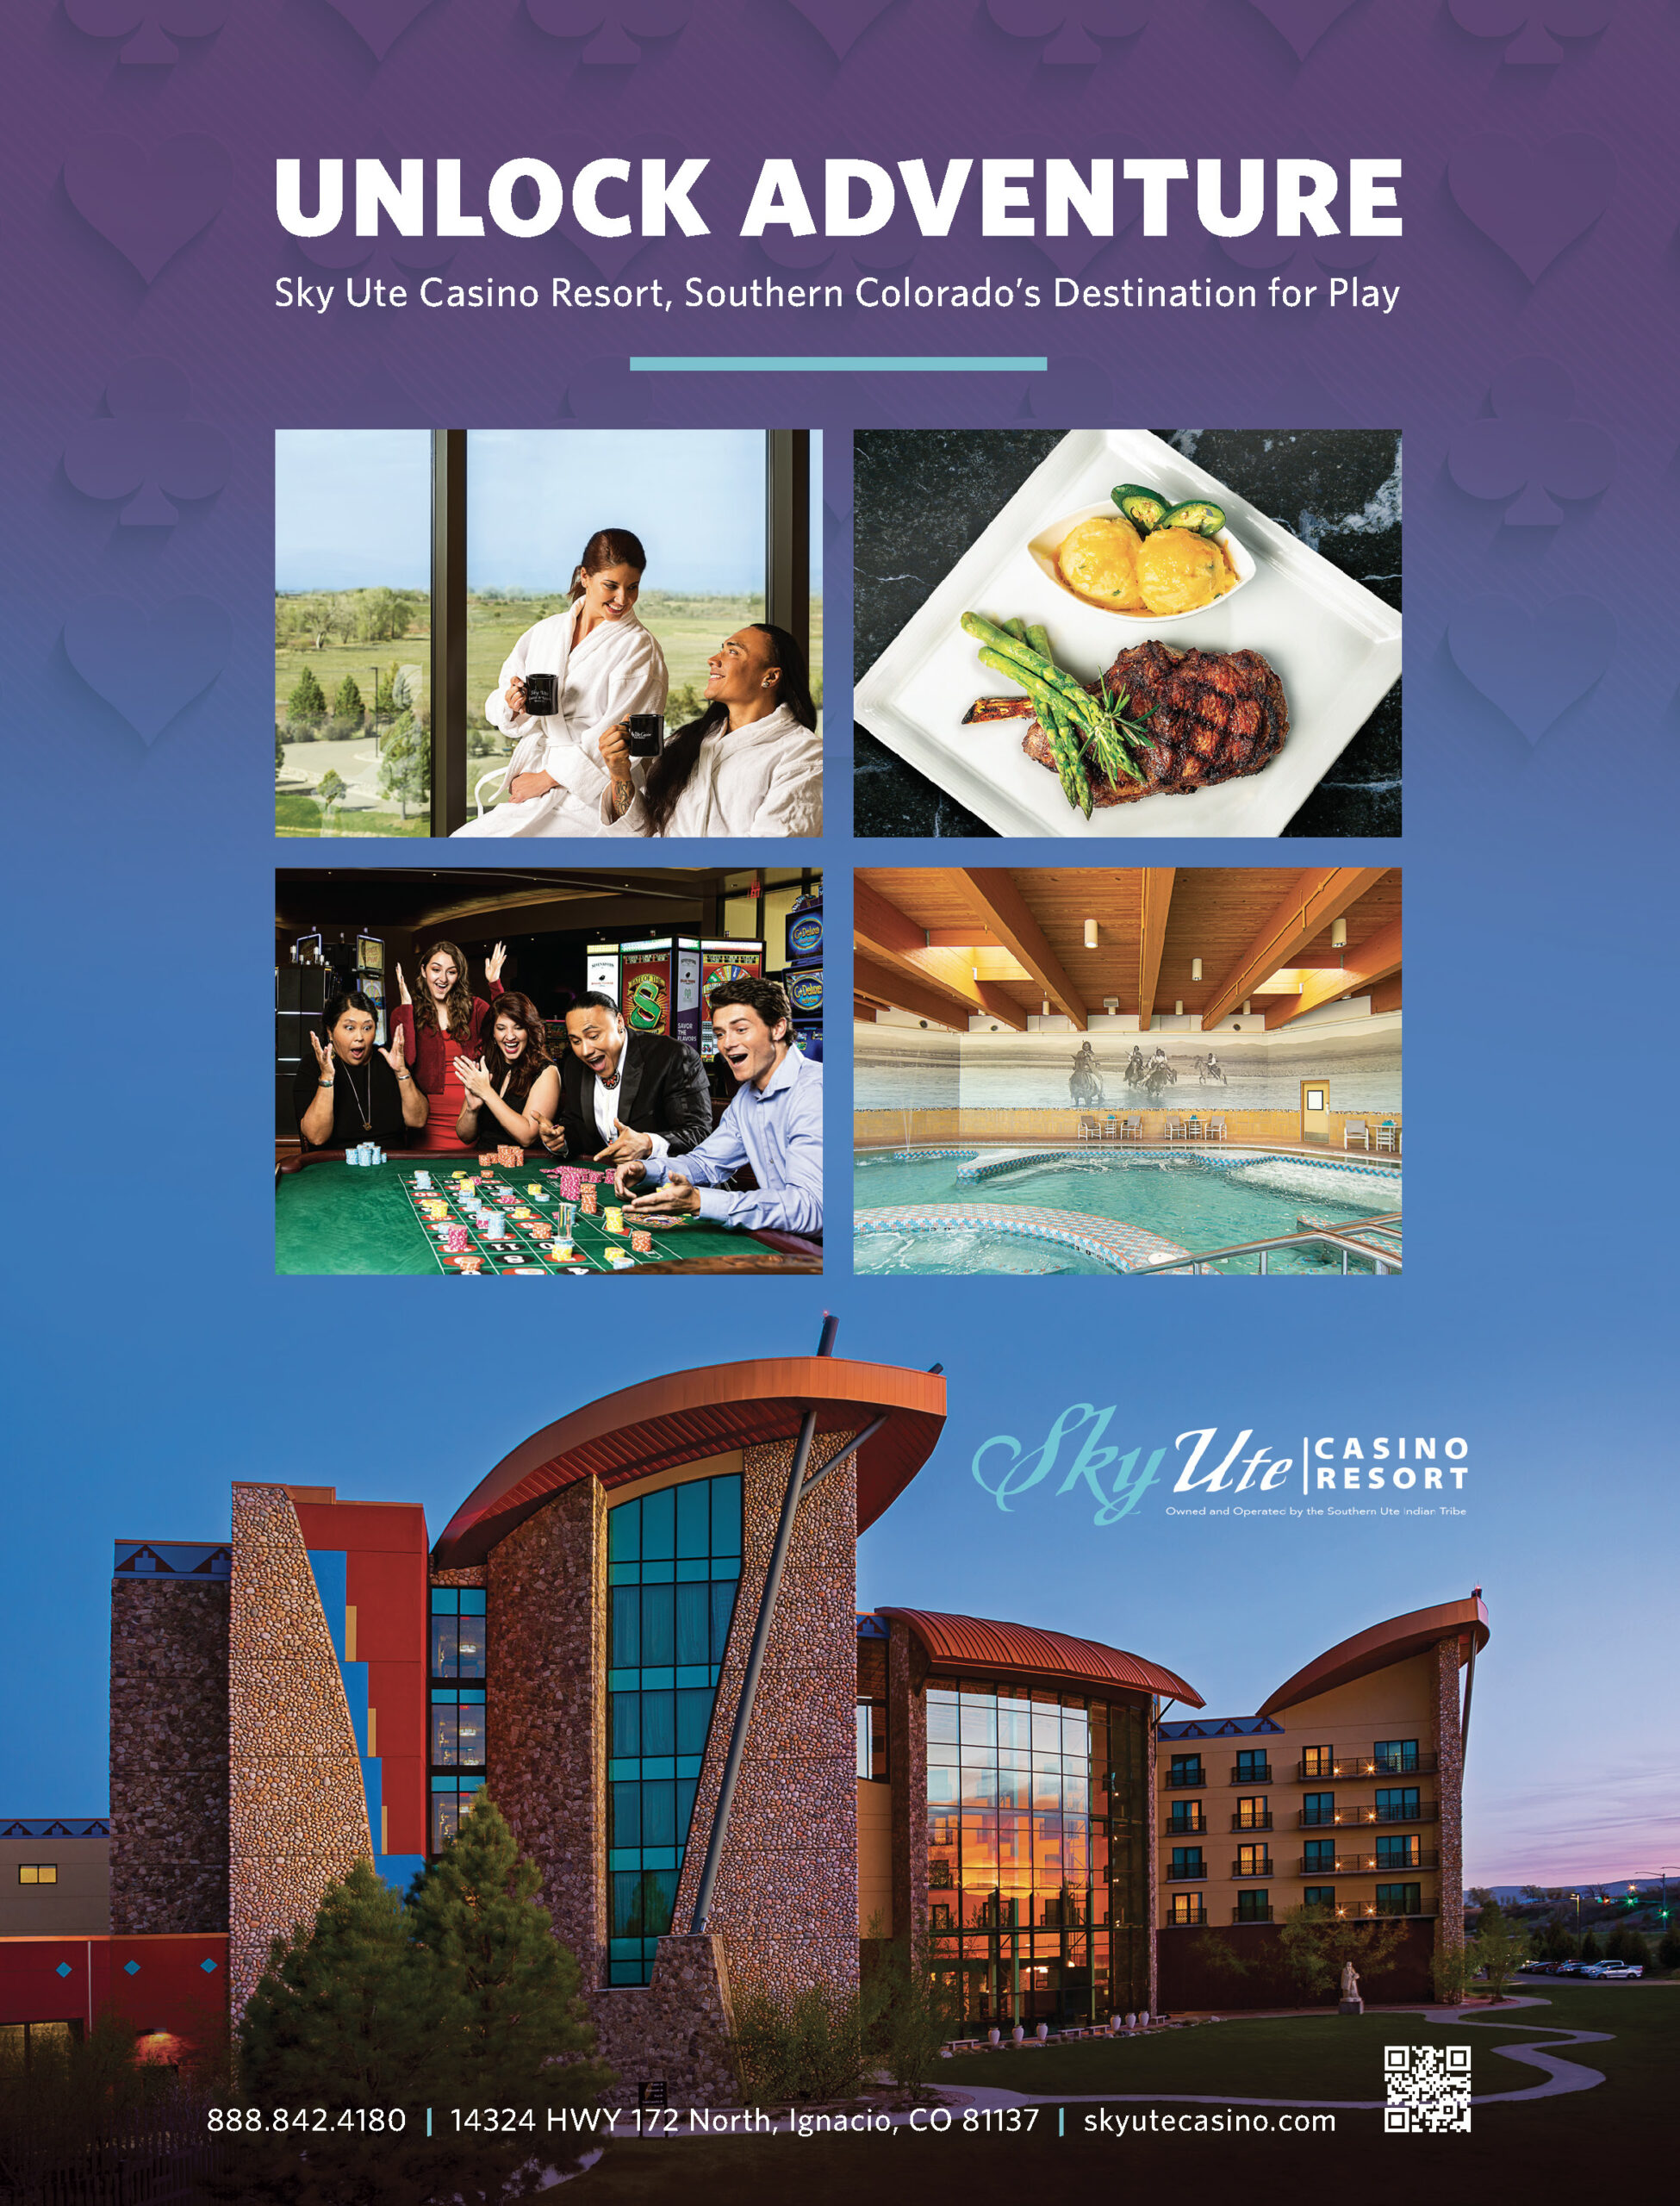 flyer for sky ute casino and resort displaying amenities like hotel, casino, pool and steak house